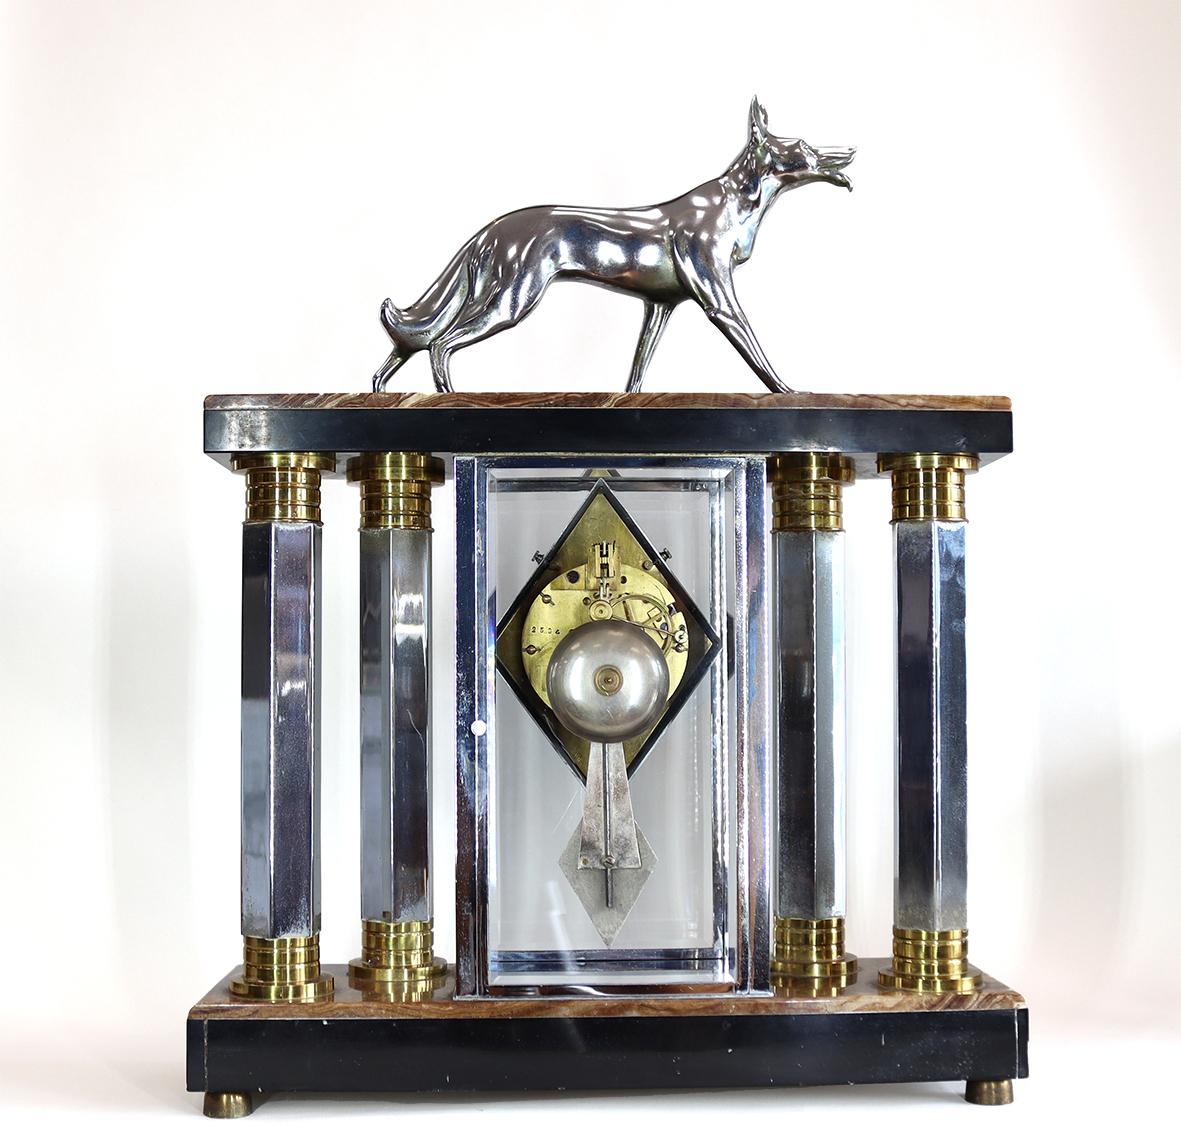 Early 20th Century Art Deco Clock and Garniture with Michel Decoux Sculpture of German Shepherd Dog For Sale